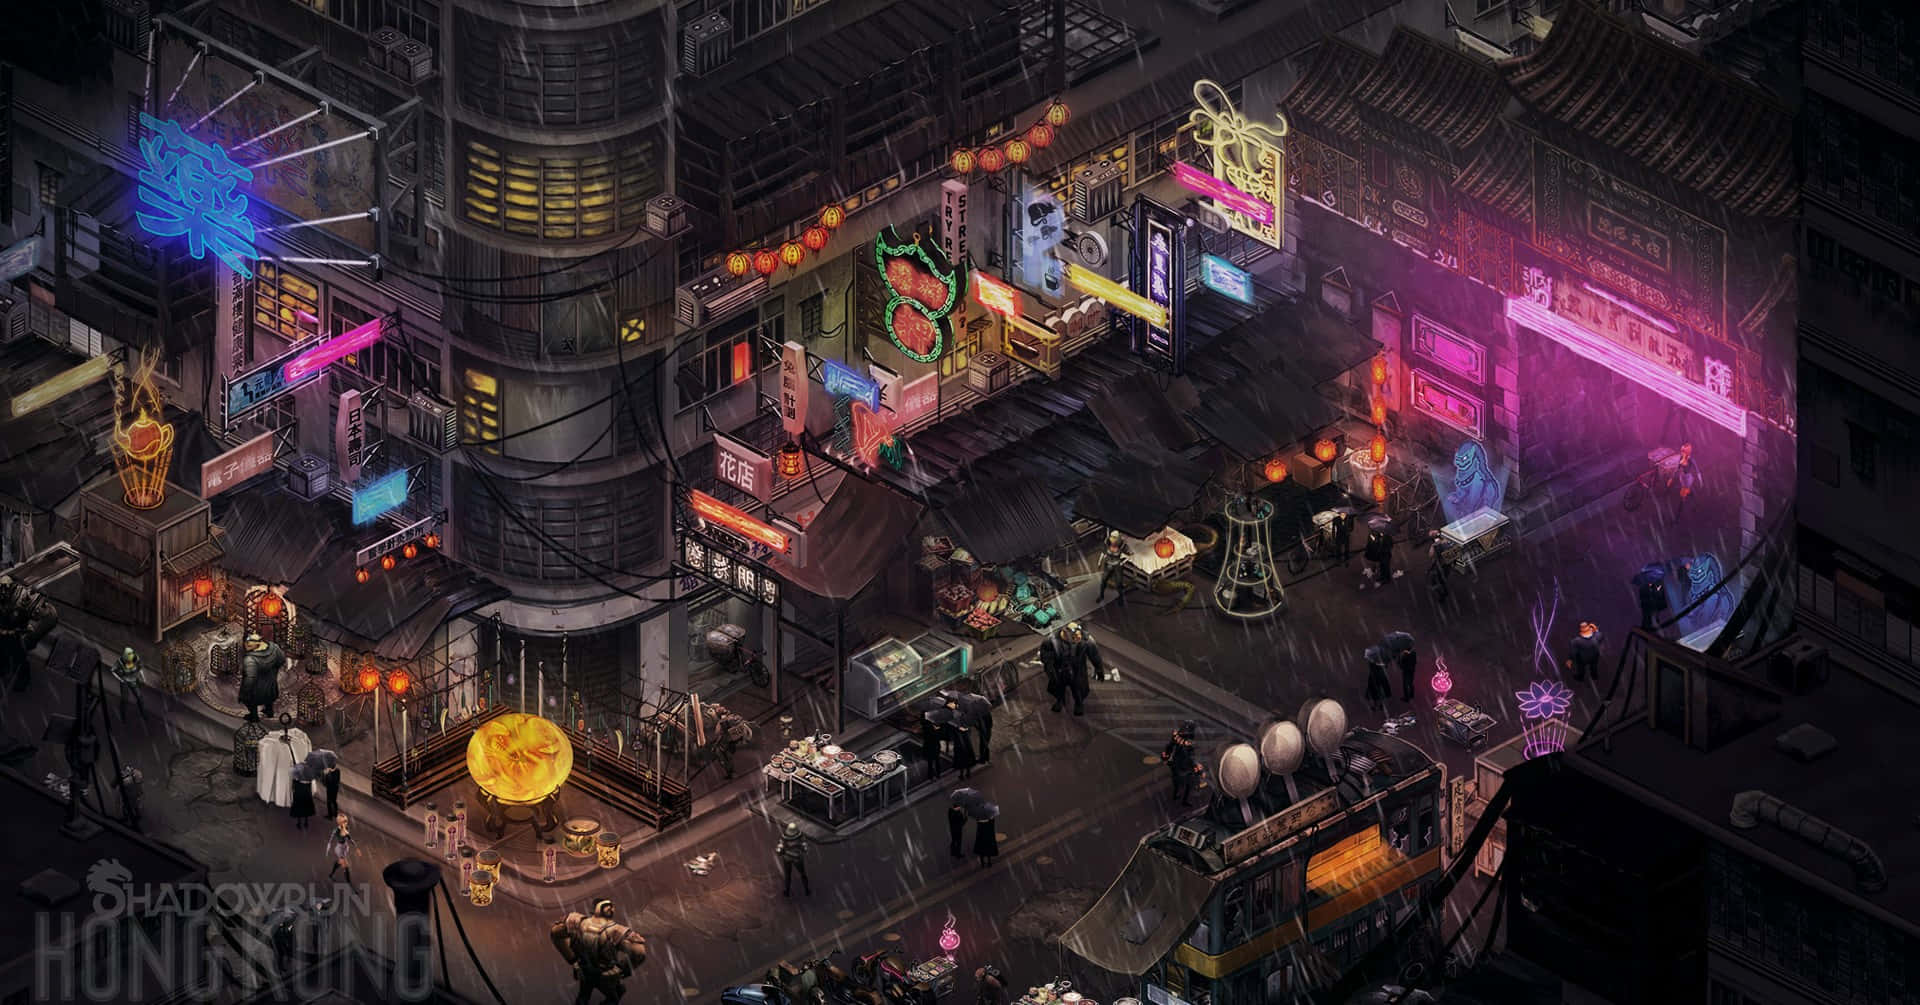 Experience the Darker Side of Technology in Shadowrun Wallpaper